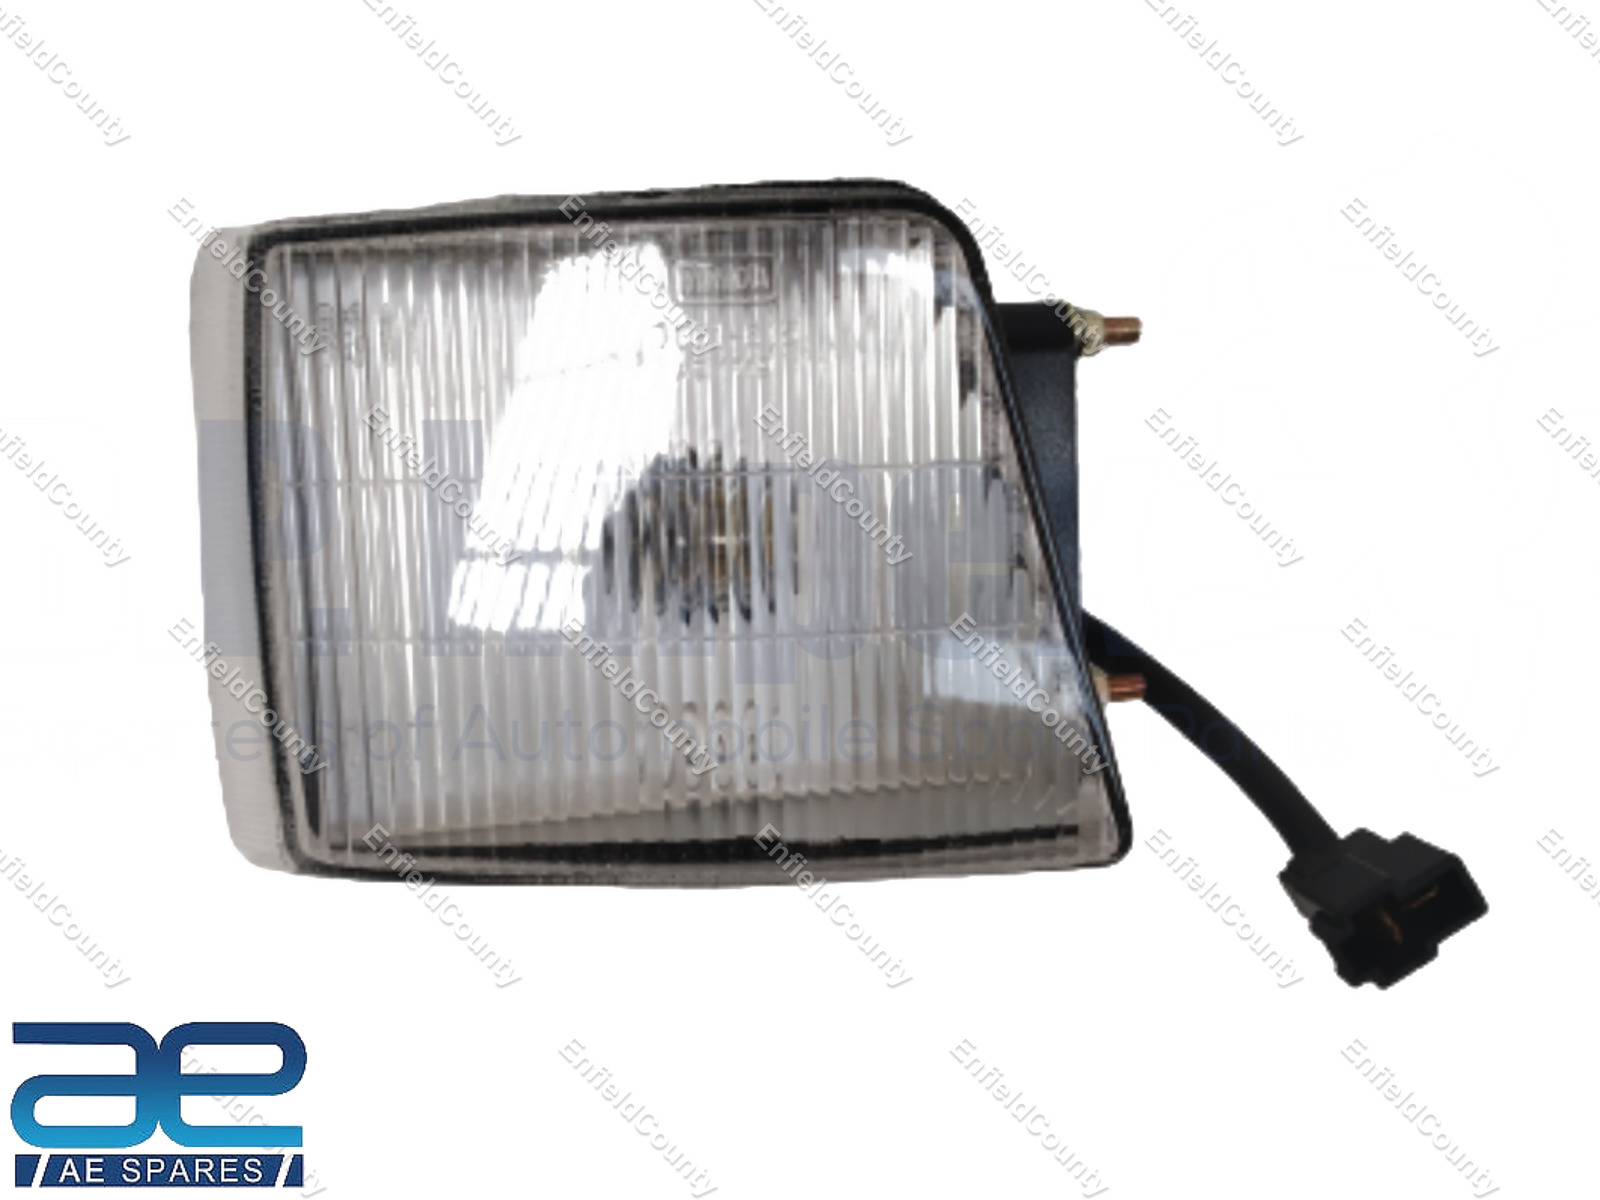 Side Indicator Lamp LH 000060517M01 For Mahindra Tractor  